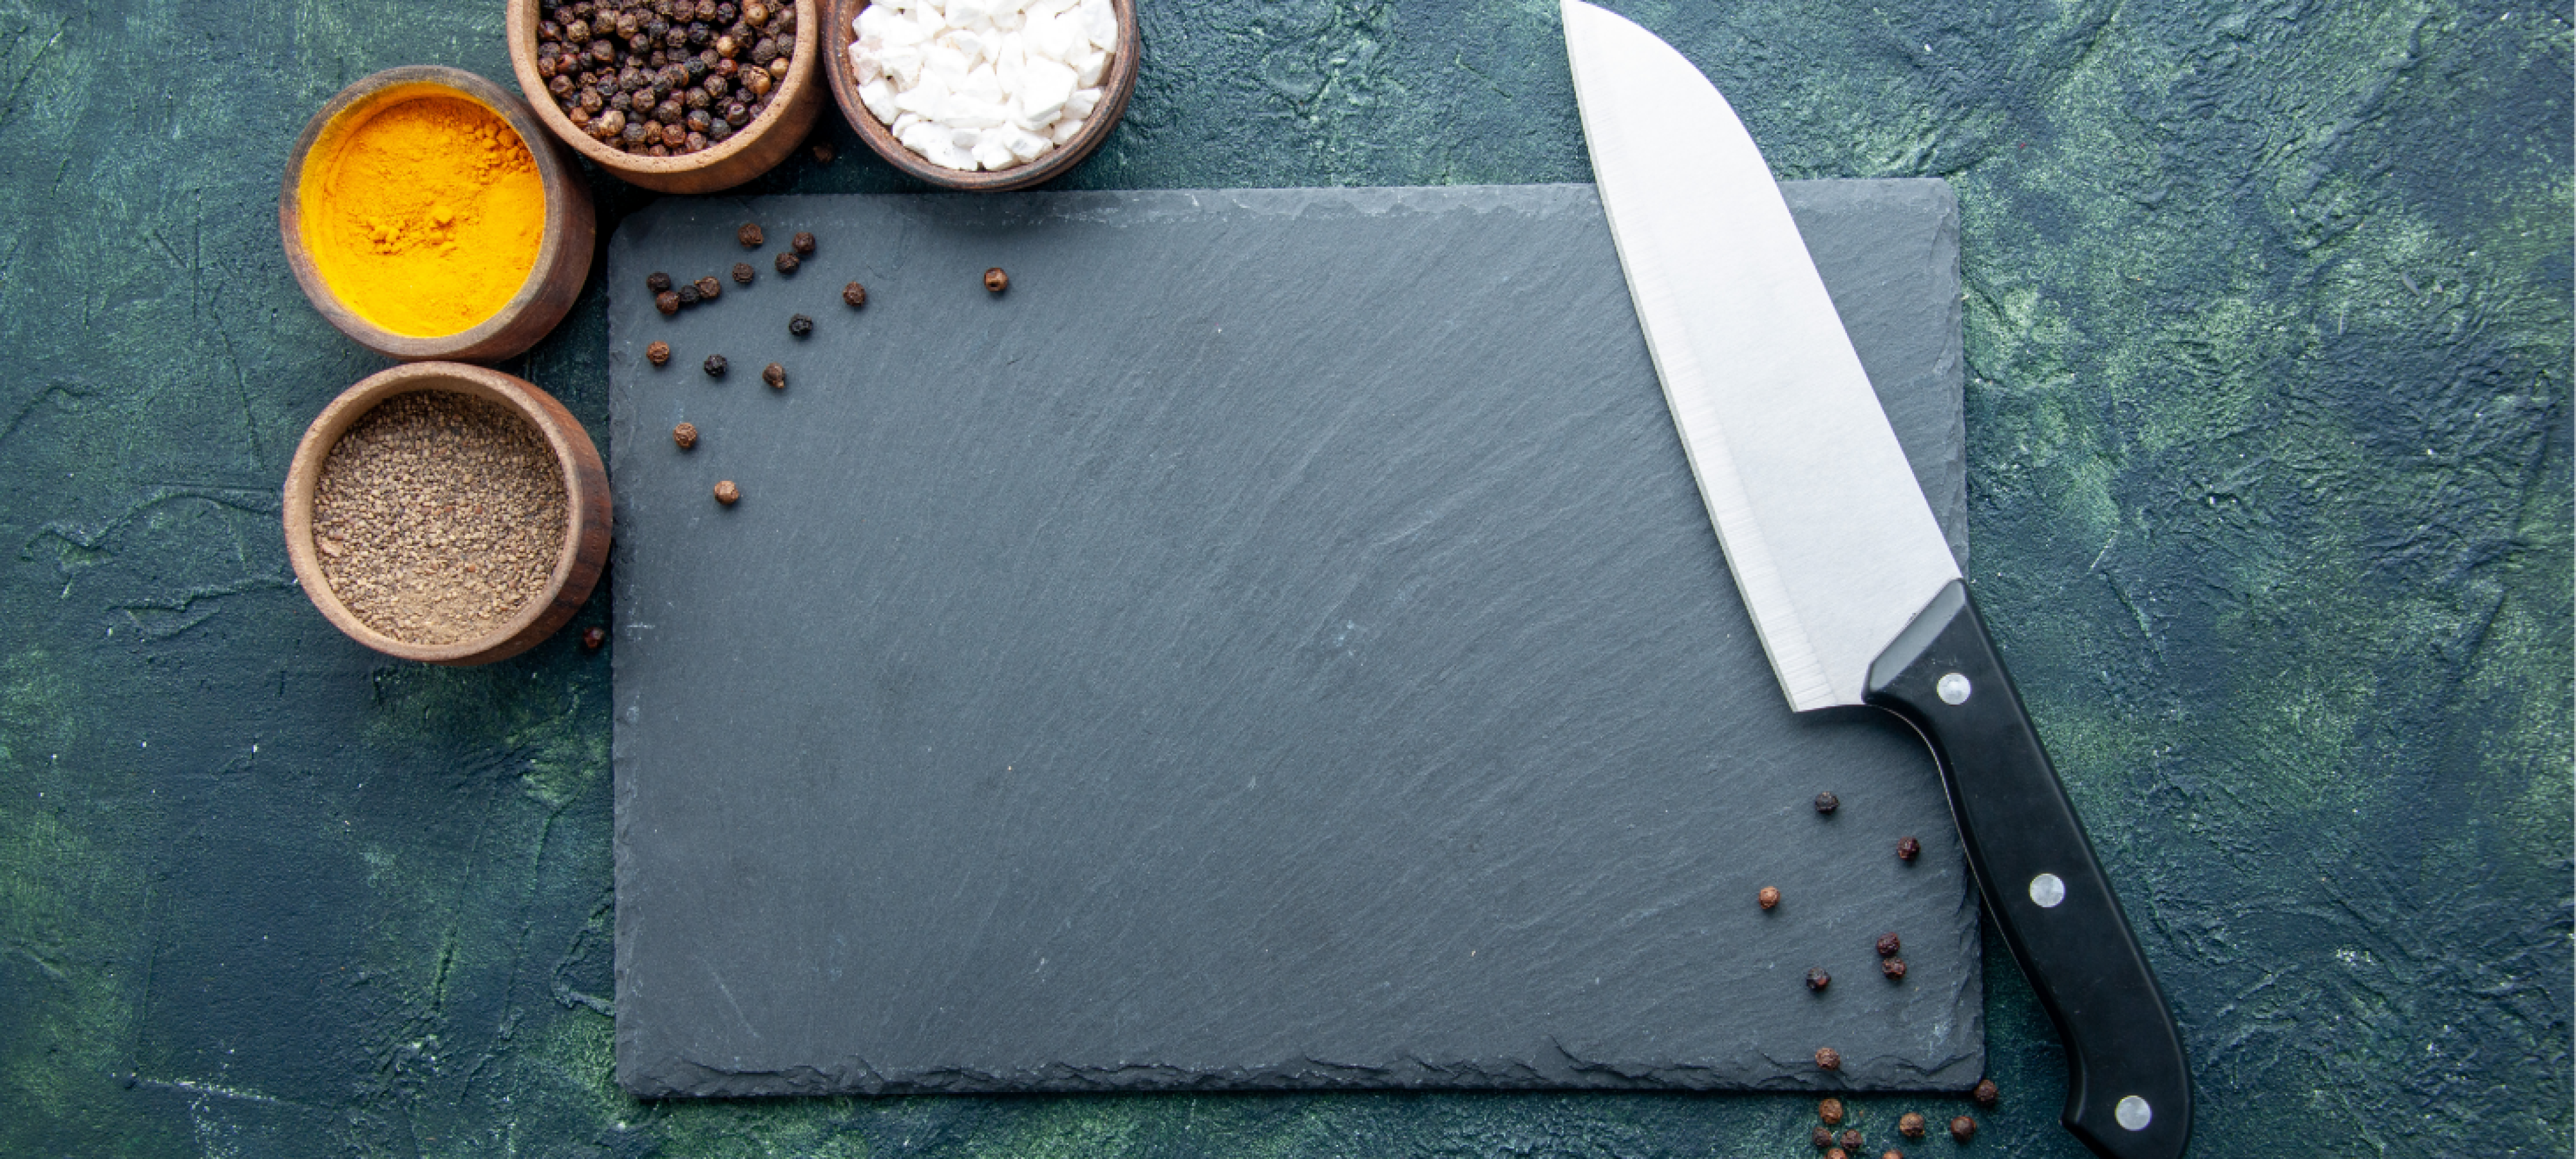 Eight Lacerating Chef Knives That You Can Buy Under $50